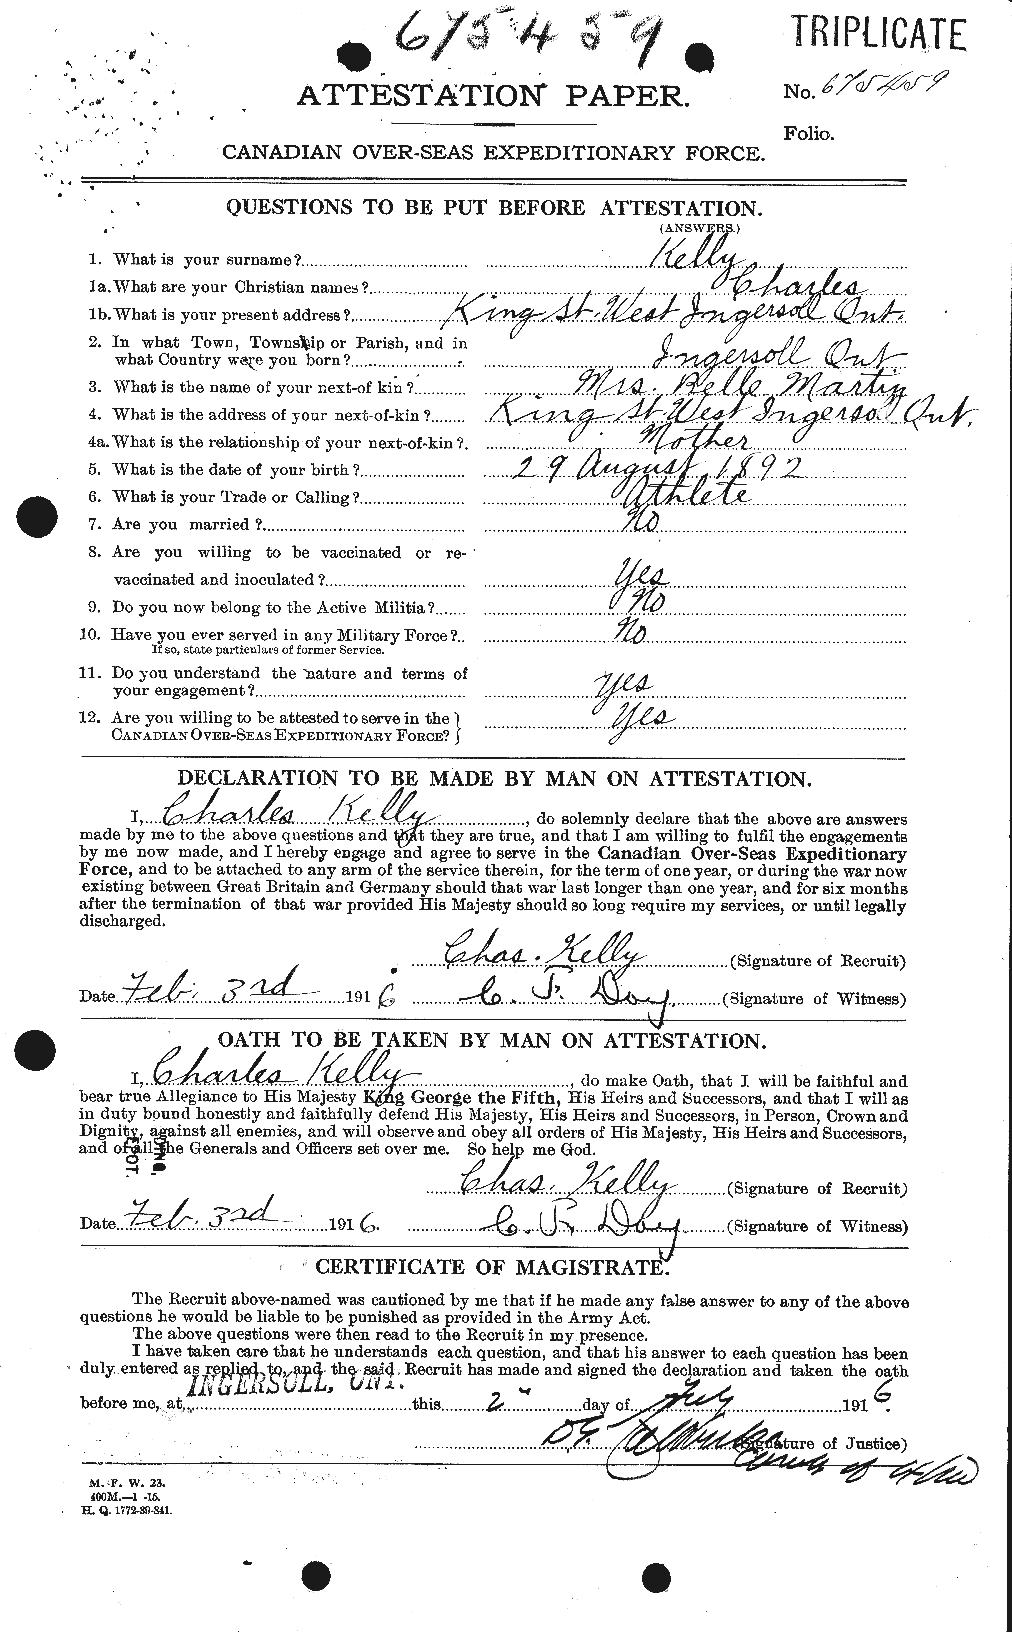 Personnel Records of the First World War - CEF 431236a